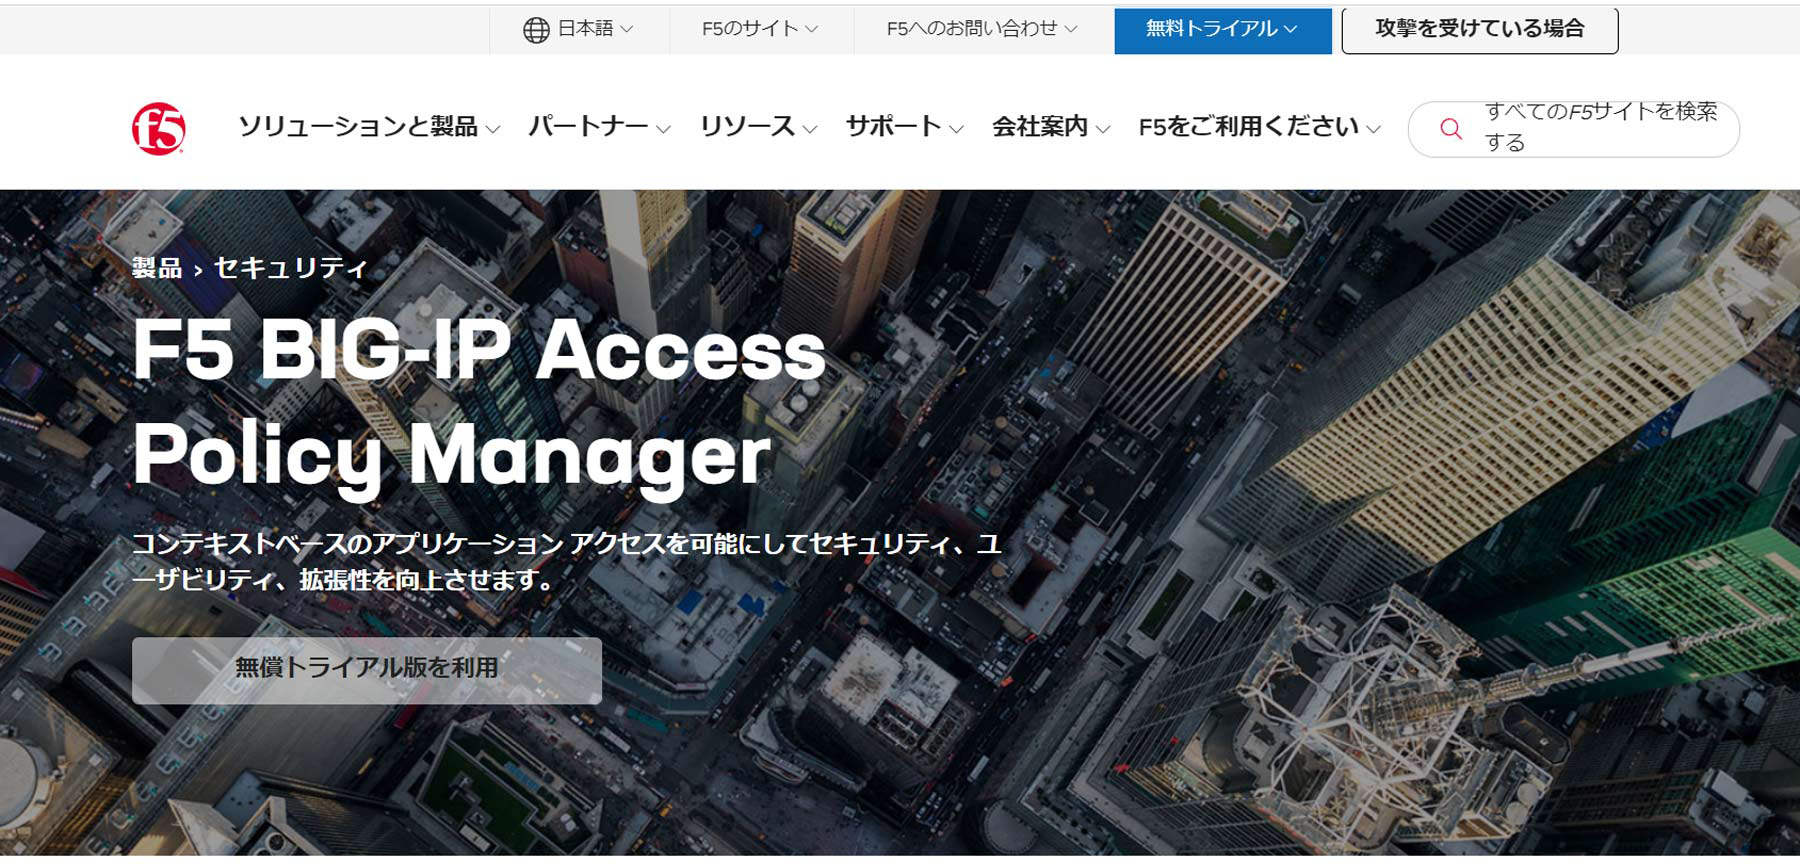 F5 BIG-IP Access Policy Manager公式Webサイト